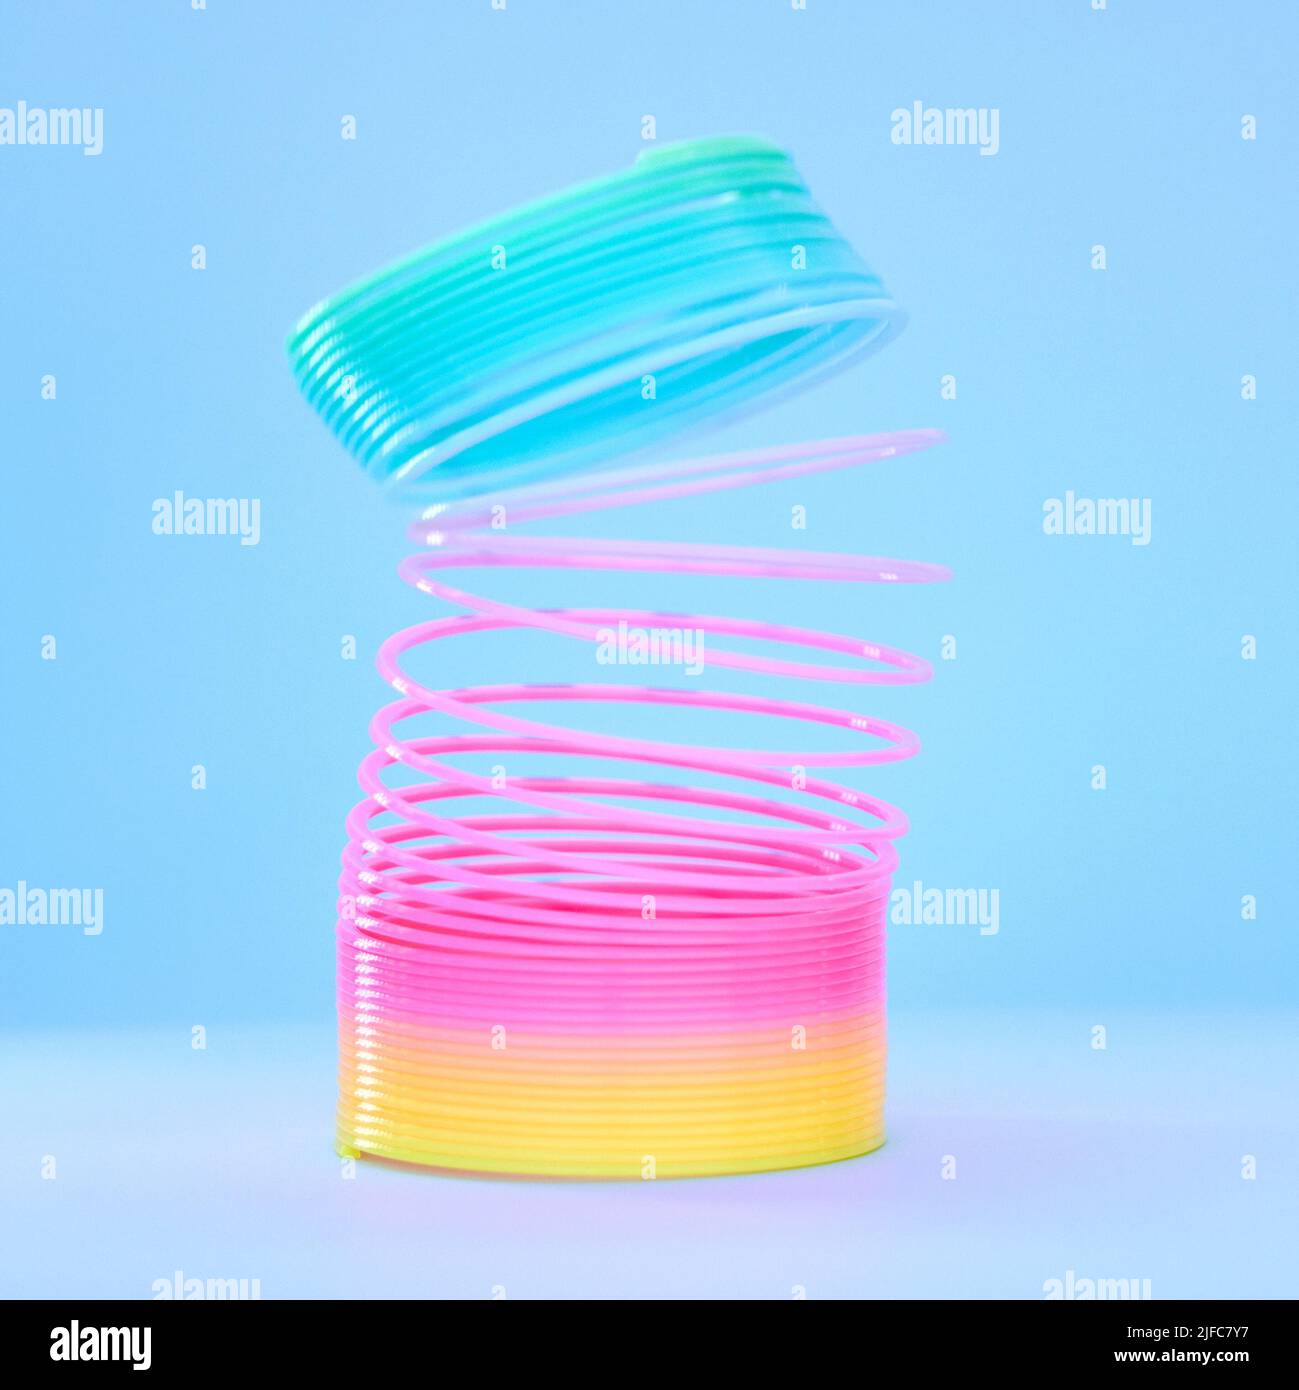 Closeup of a colourful flexible plastic rainbow slinky toy in stretched out motion isolated against a blue background. Entertaining childhood color Stock Photo